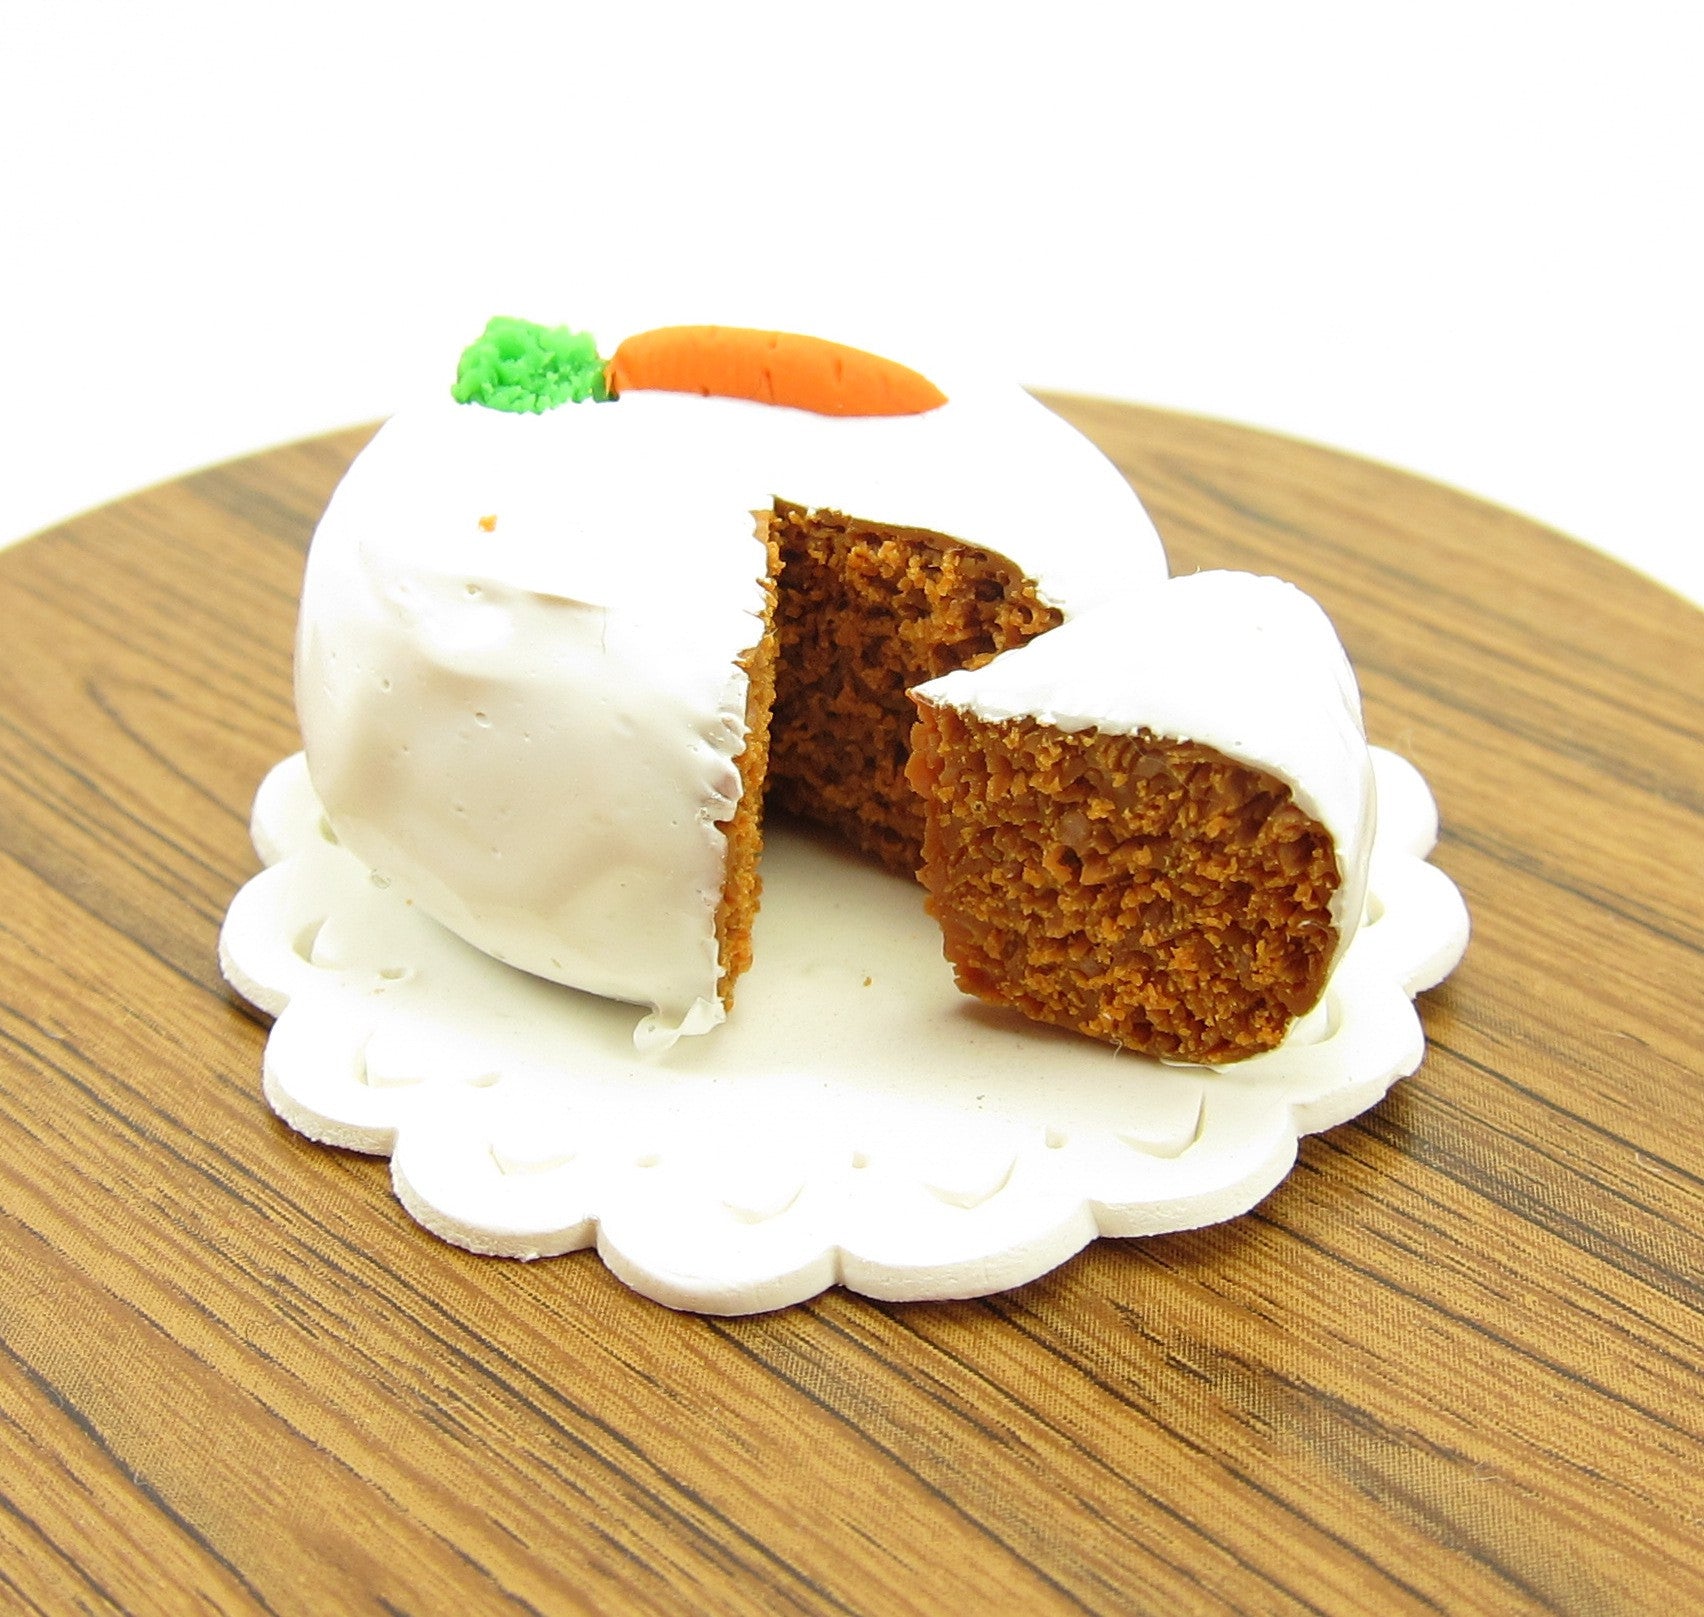 Dollhouse Miniature Carrot Spice Cake with Cream Cheese Frosting